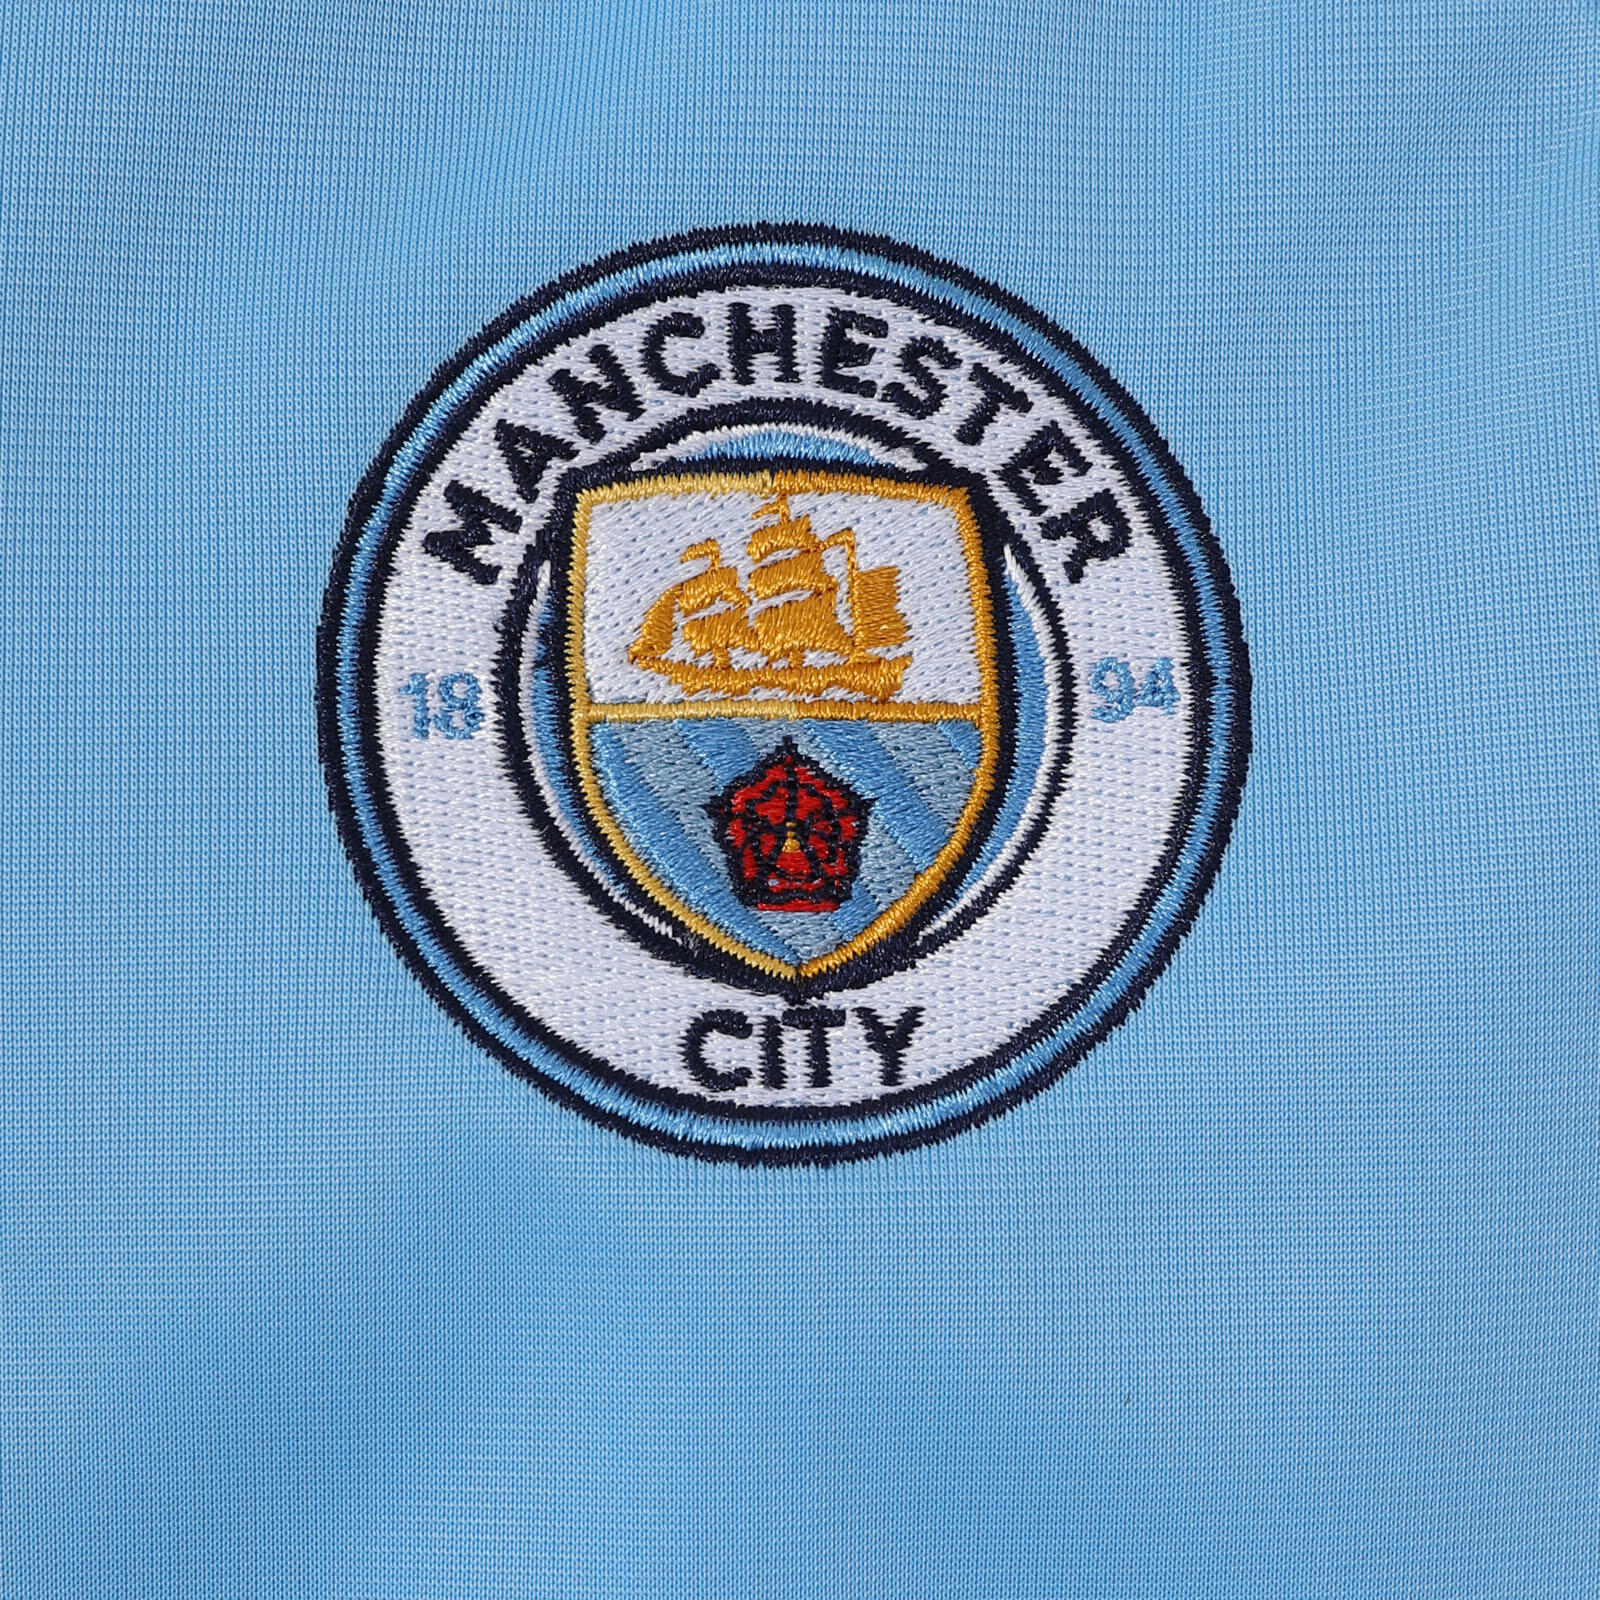 Manchester City Boys Jacket Track Top Retro Kids OFFICIAL Football Gift 4/5